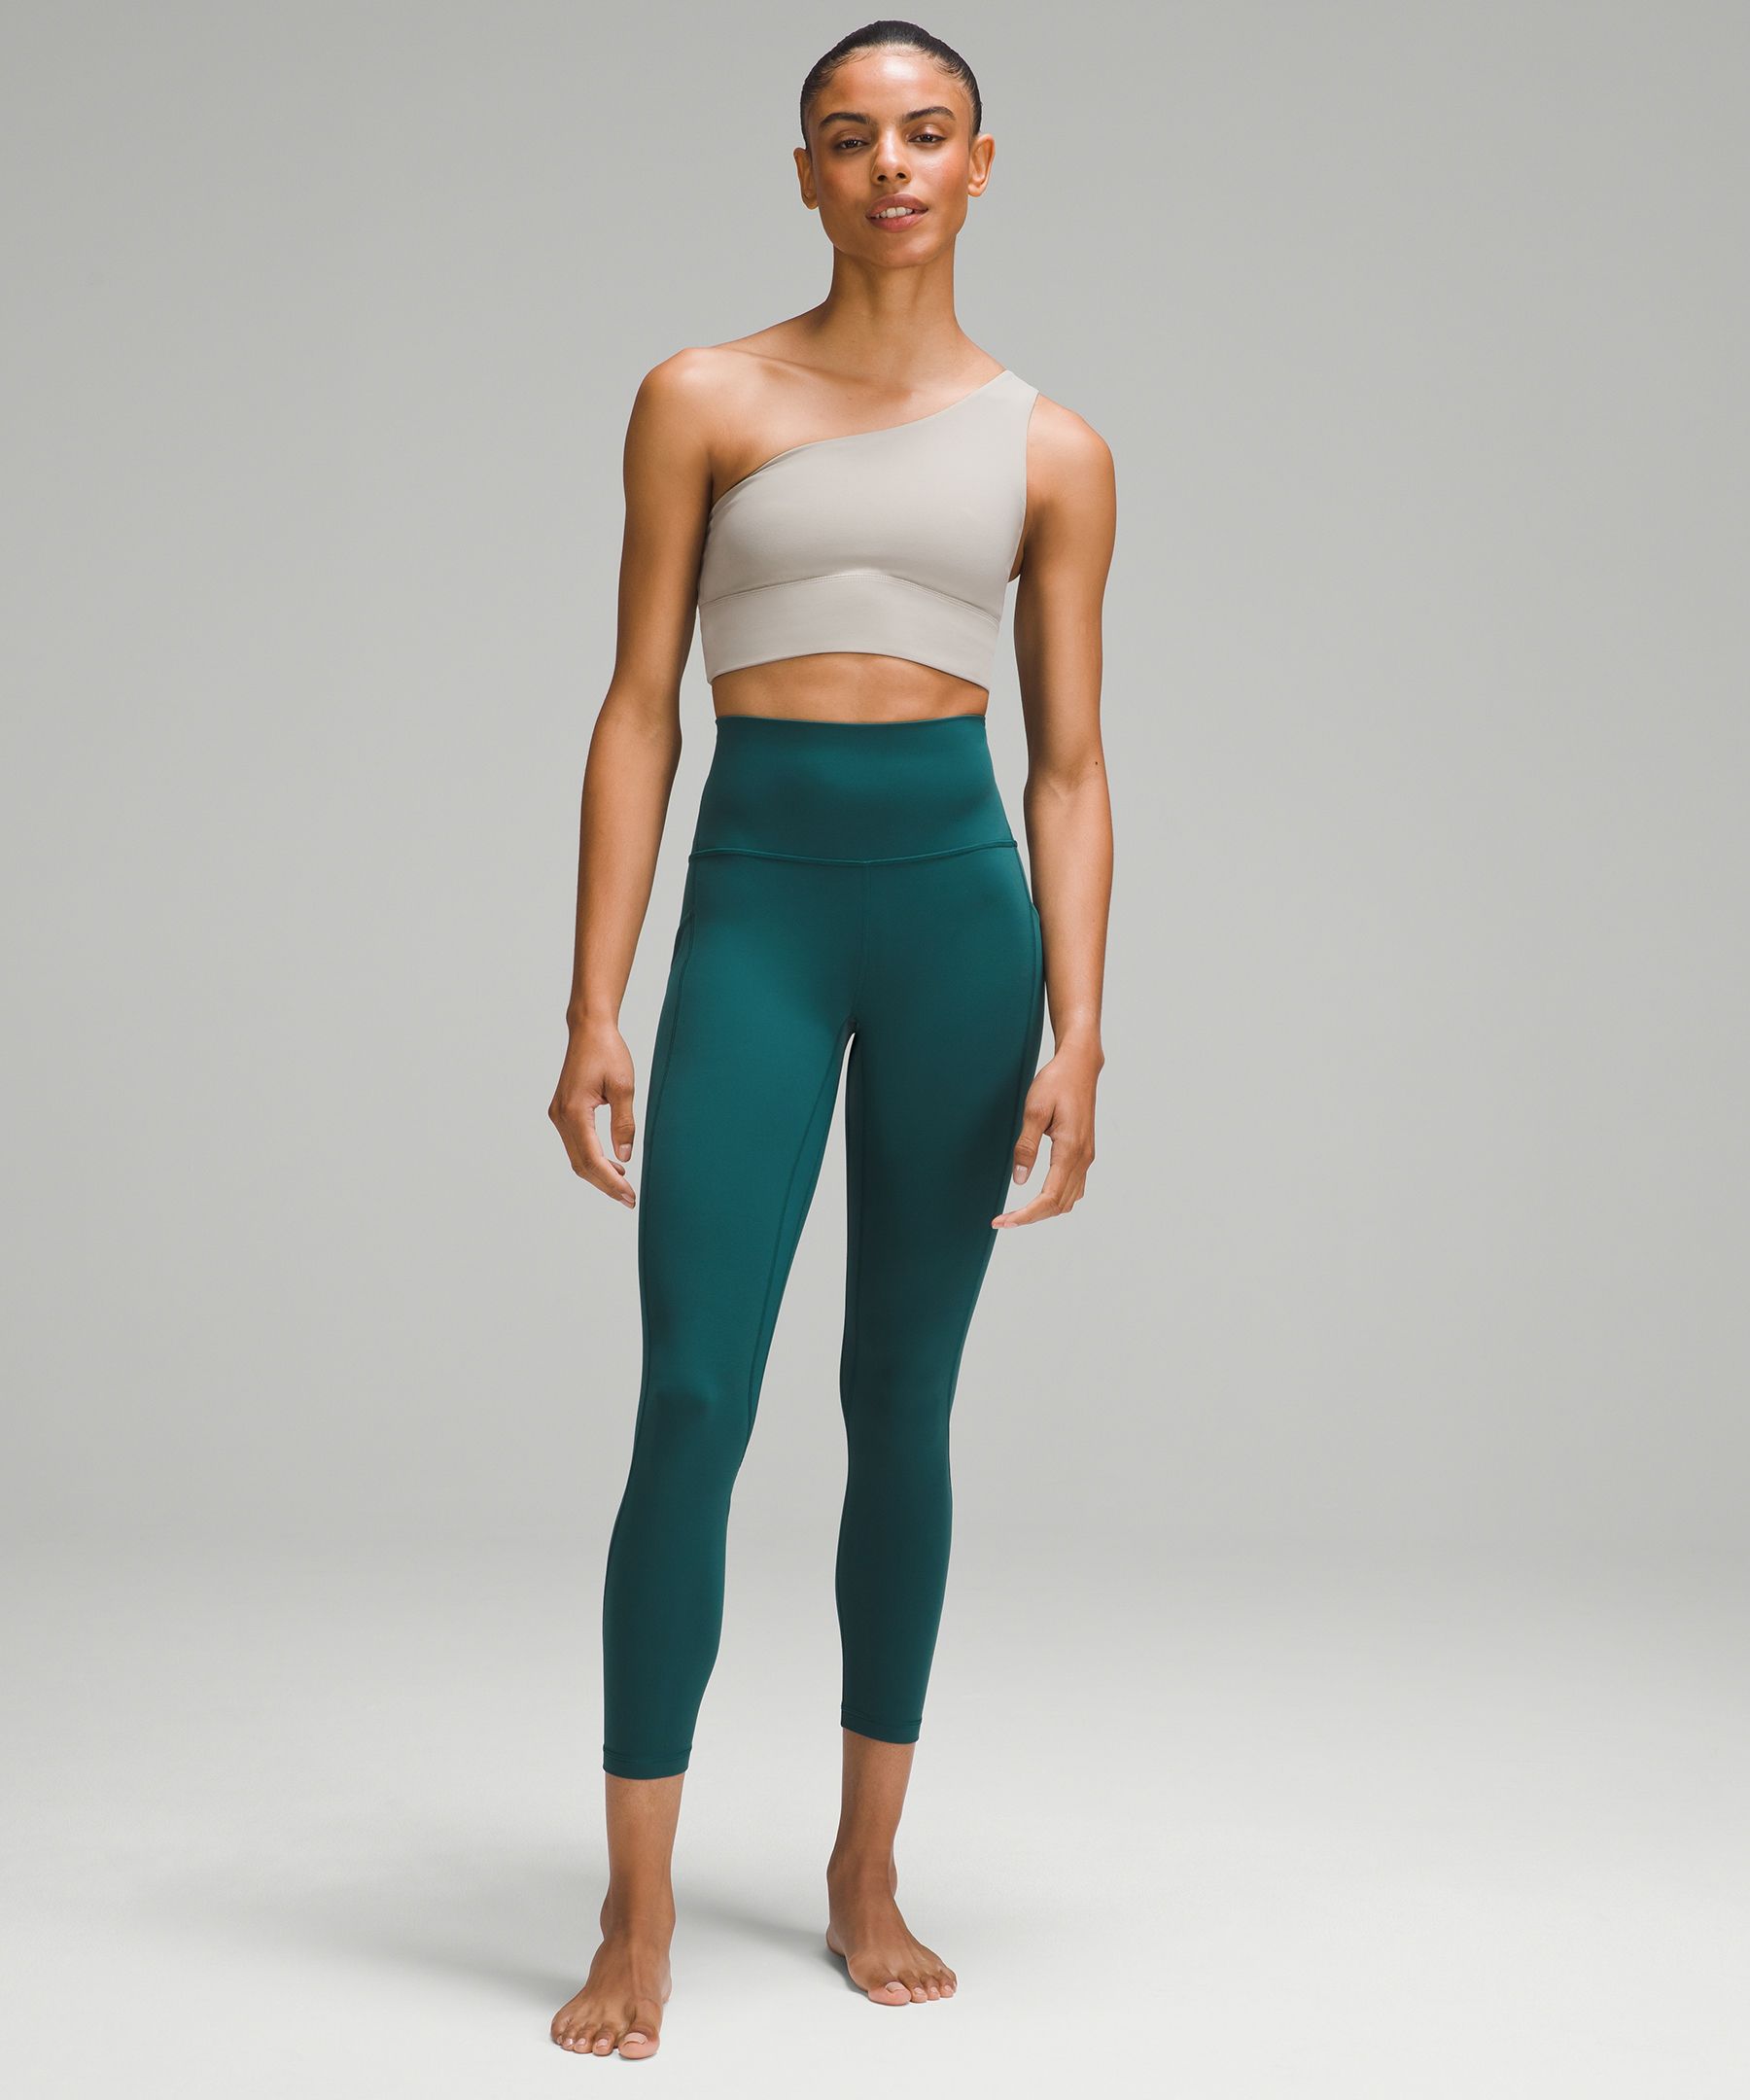 Track lululemon Align™ High-Rise Pant with Pockets 25 - Pitch Blue 